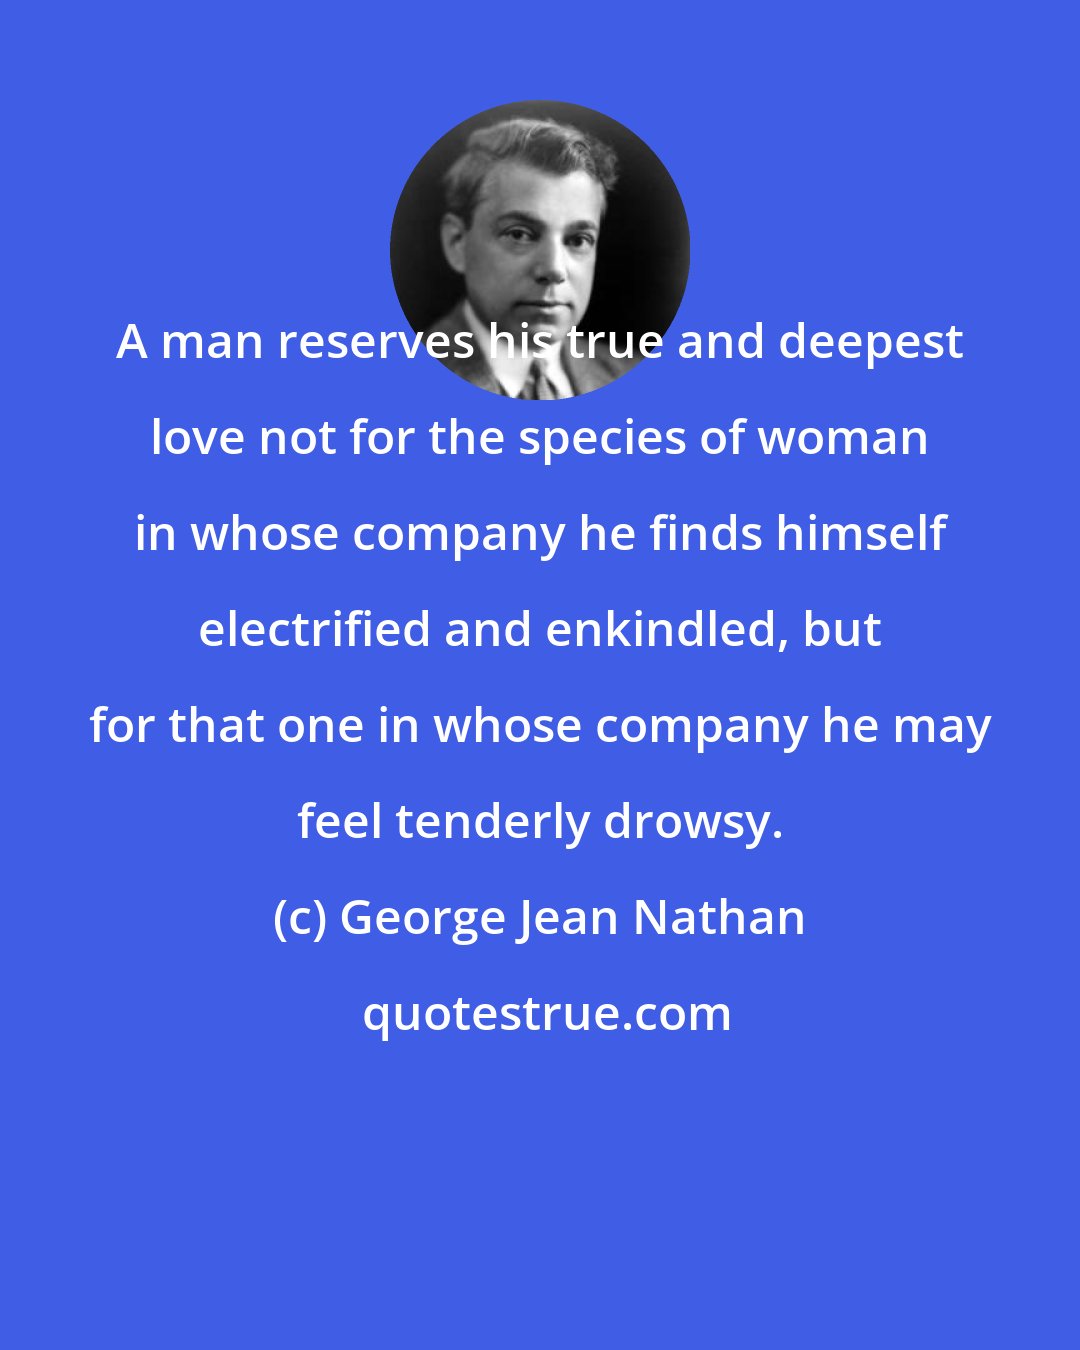 George Jean Nathan: A man reserves his true and deepest love not for the species of woman in whose company he finds himself electrified and enkindled, but for that one in whose company he may feel tenderly drowsy.